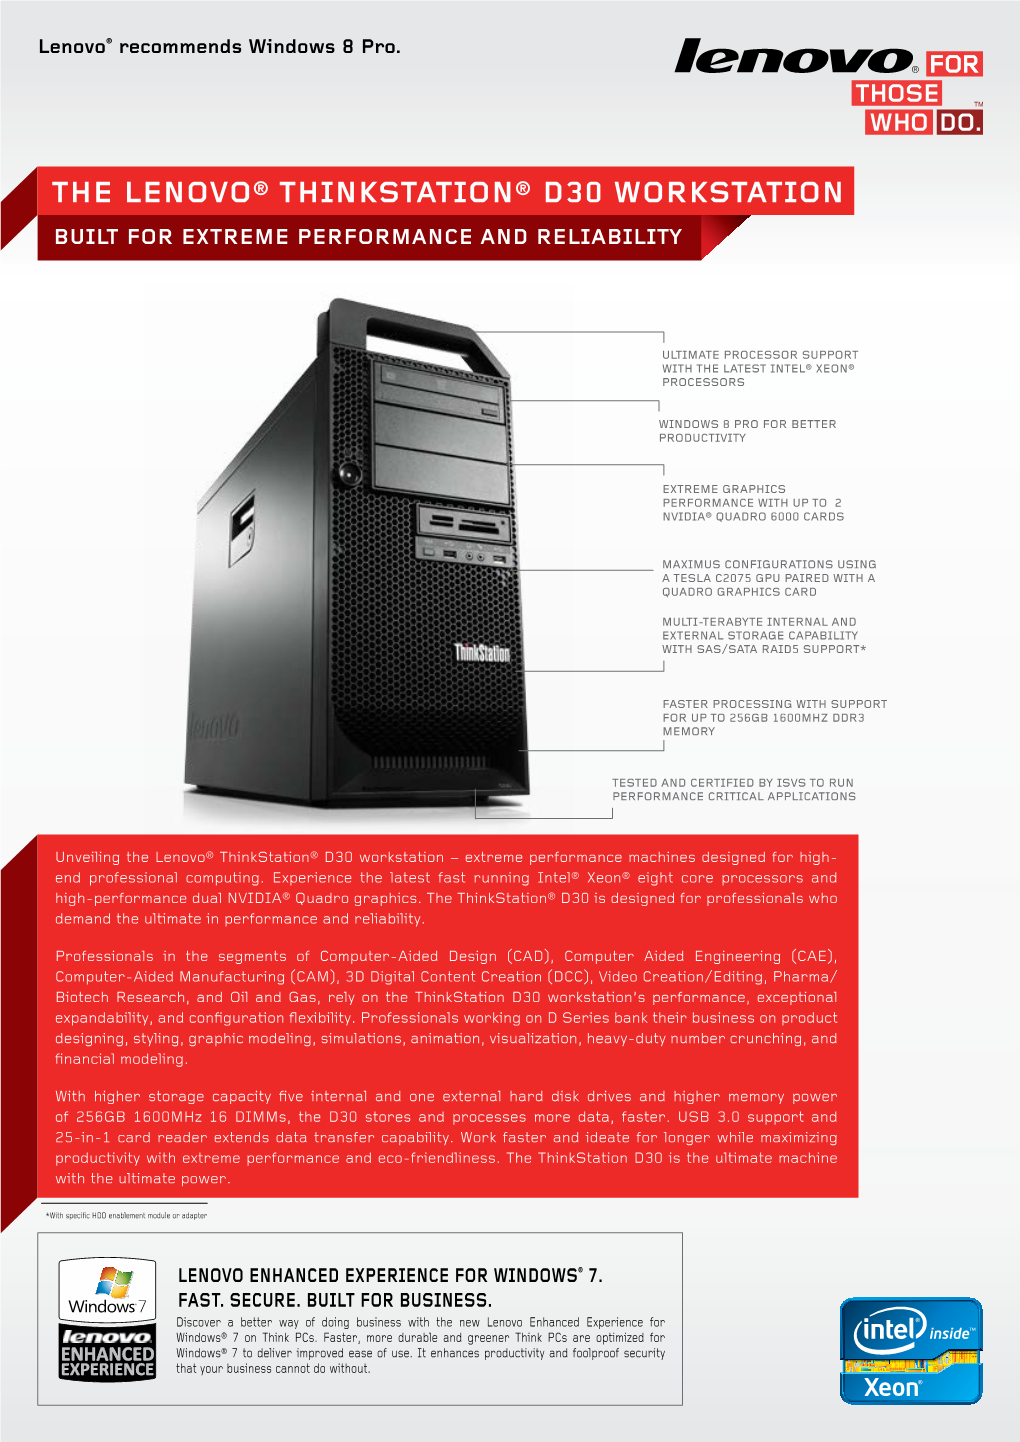 The Lenovo® Thinkstation® D30 Workstation BUILT for EXTREME PERFORMANCE and RELIABILITY